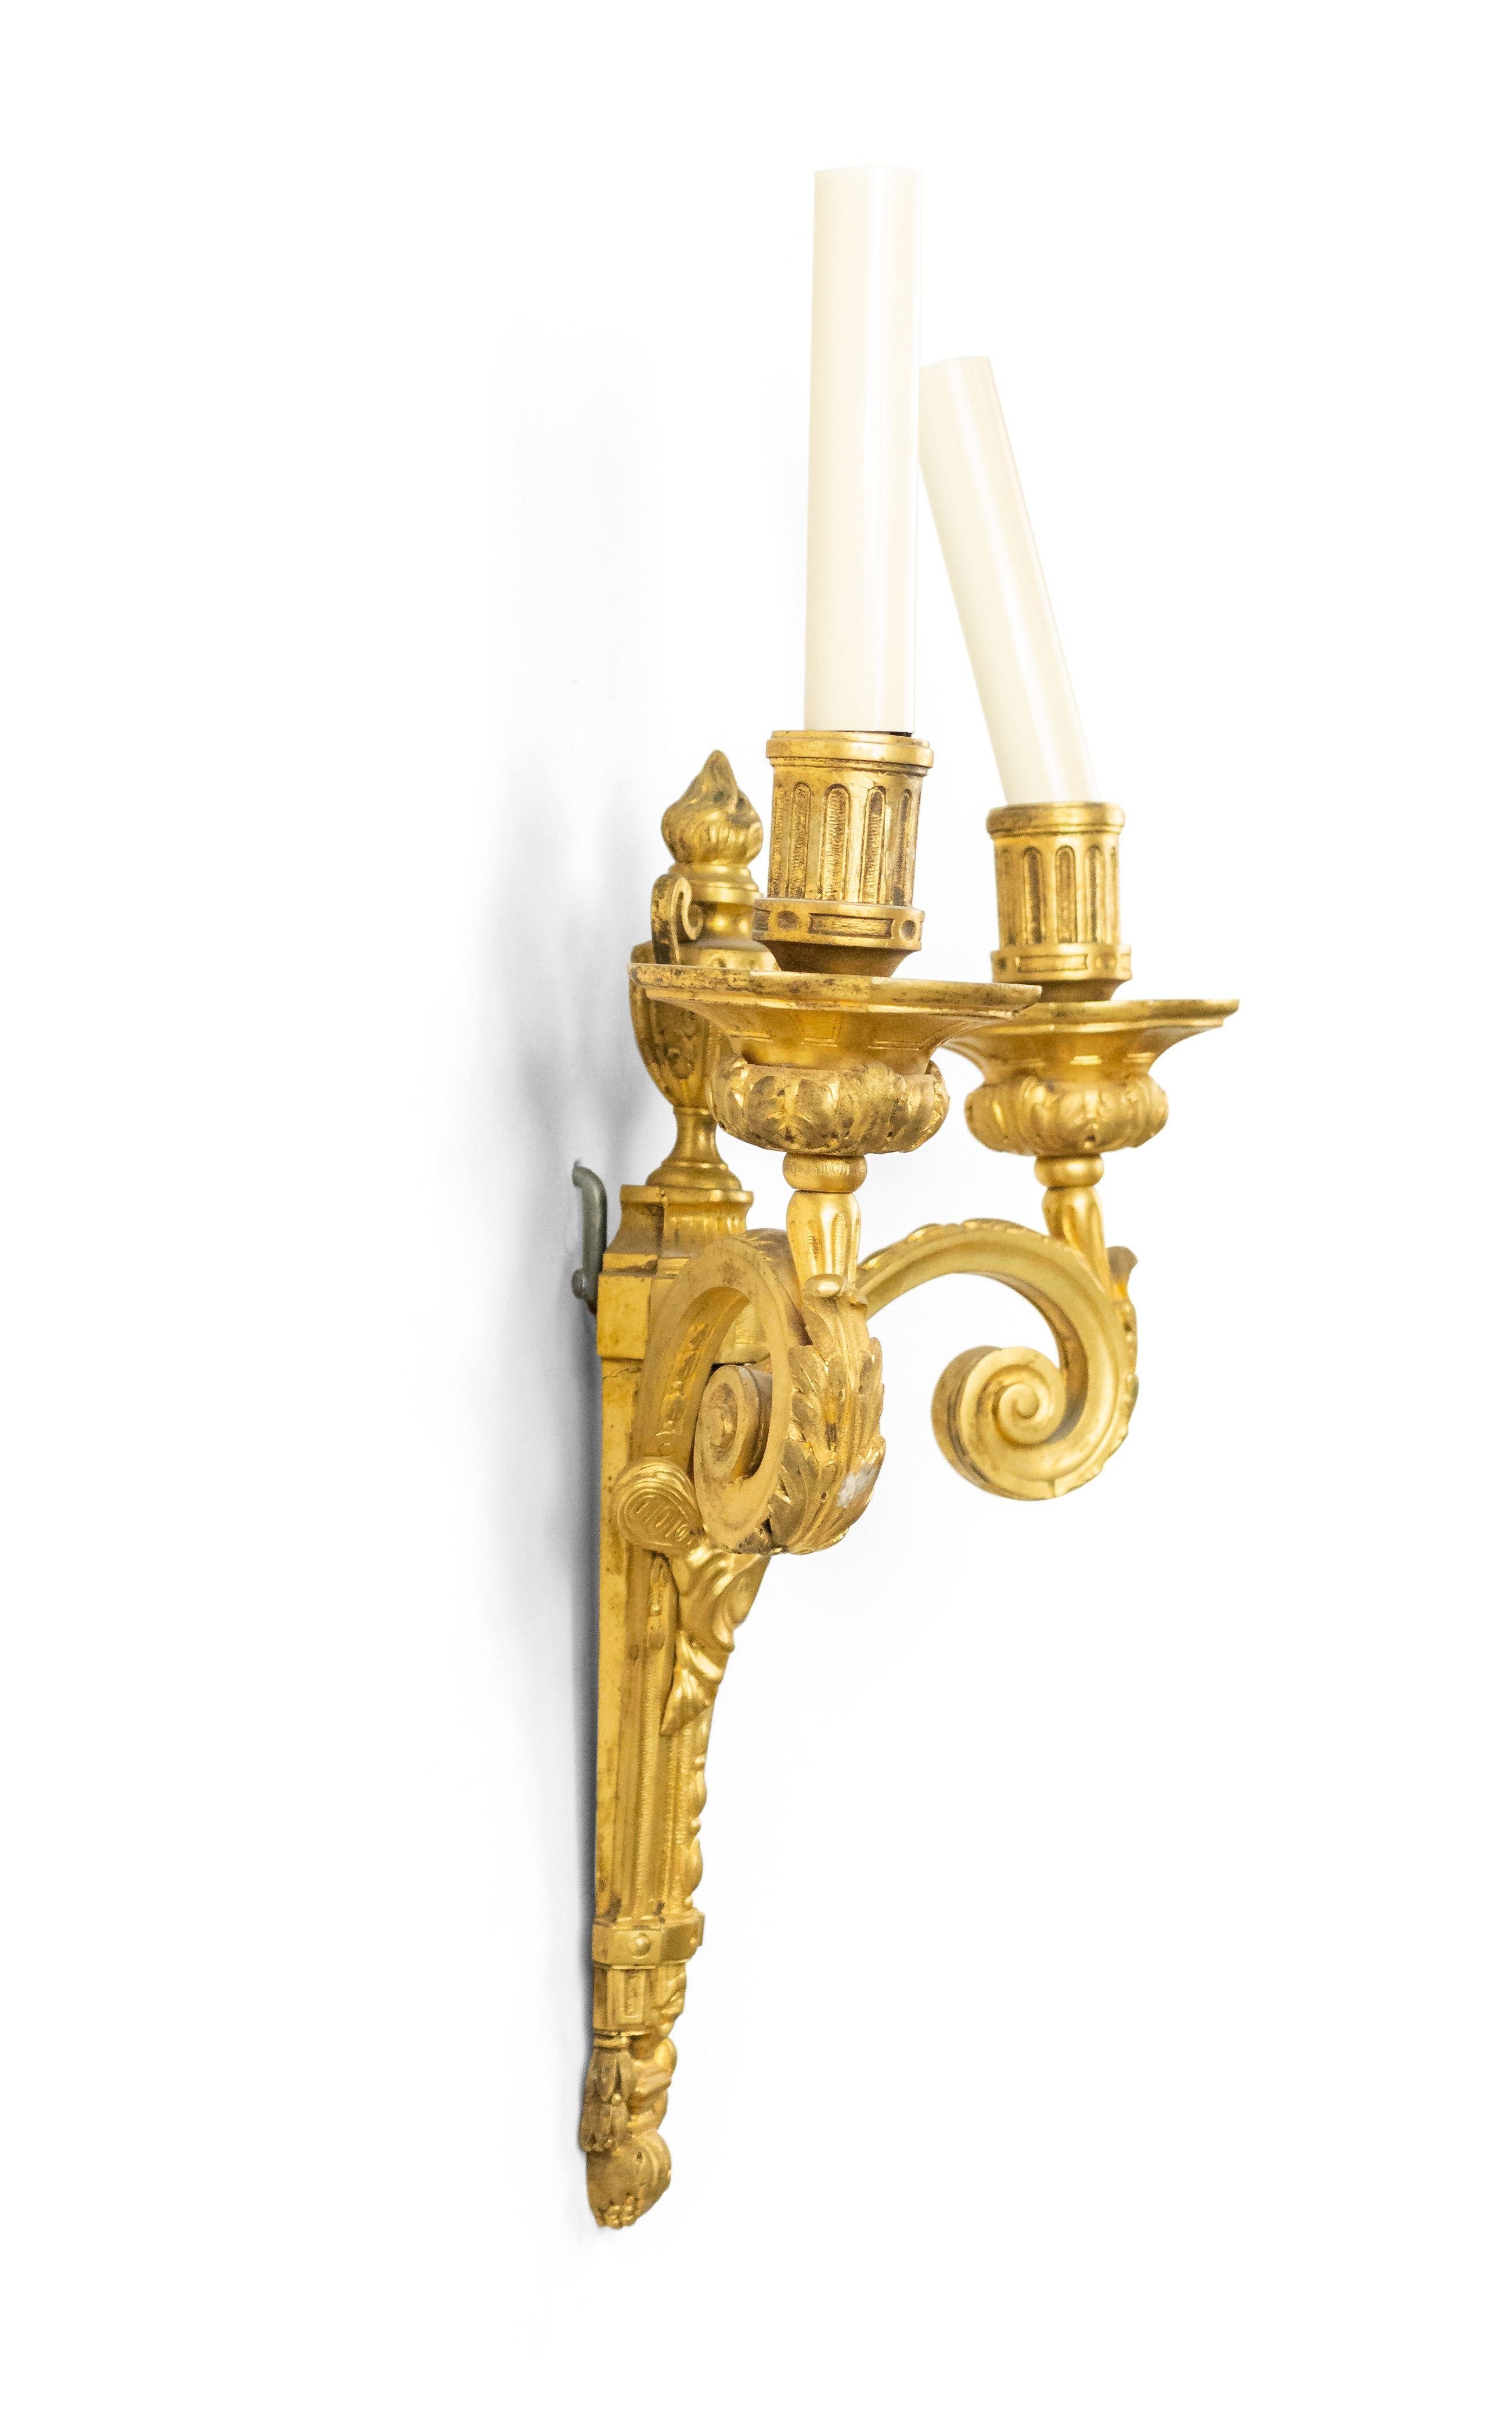 French Louis XVI style 19th century bronze doré scroll 2-arm wall sconce with cupid head and urn top.